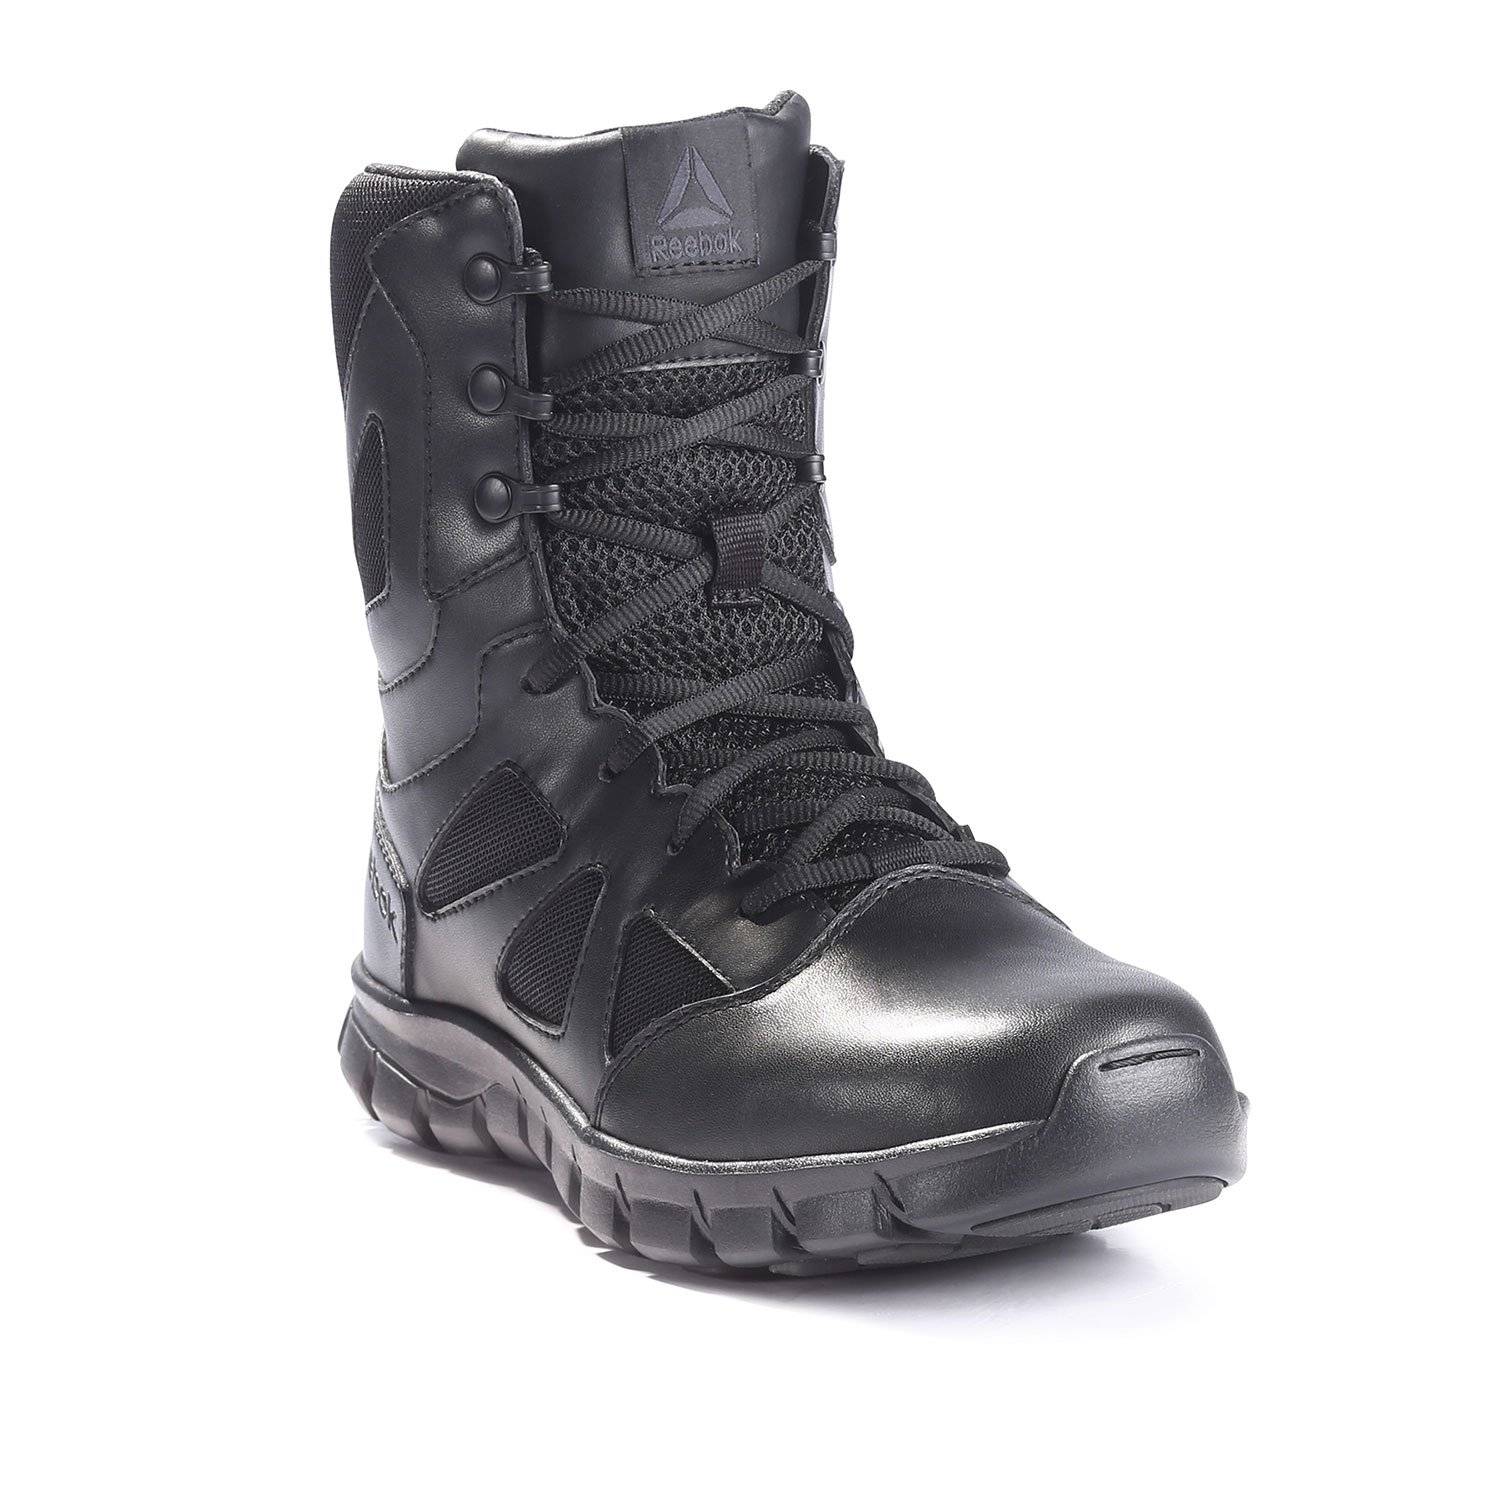 reebok police boots, Off 66%,